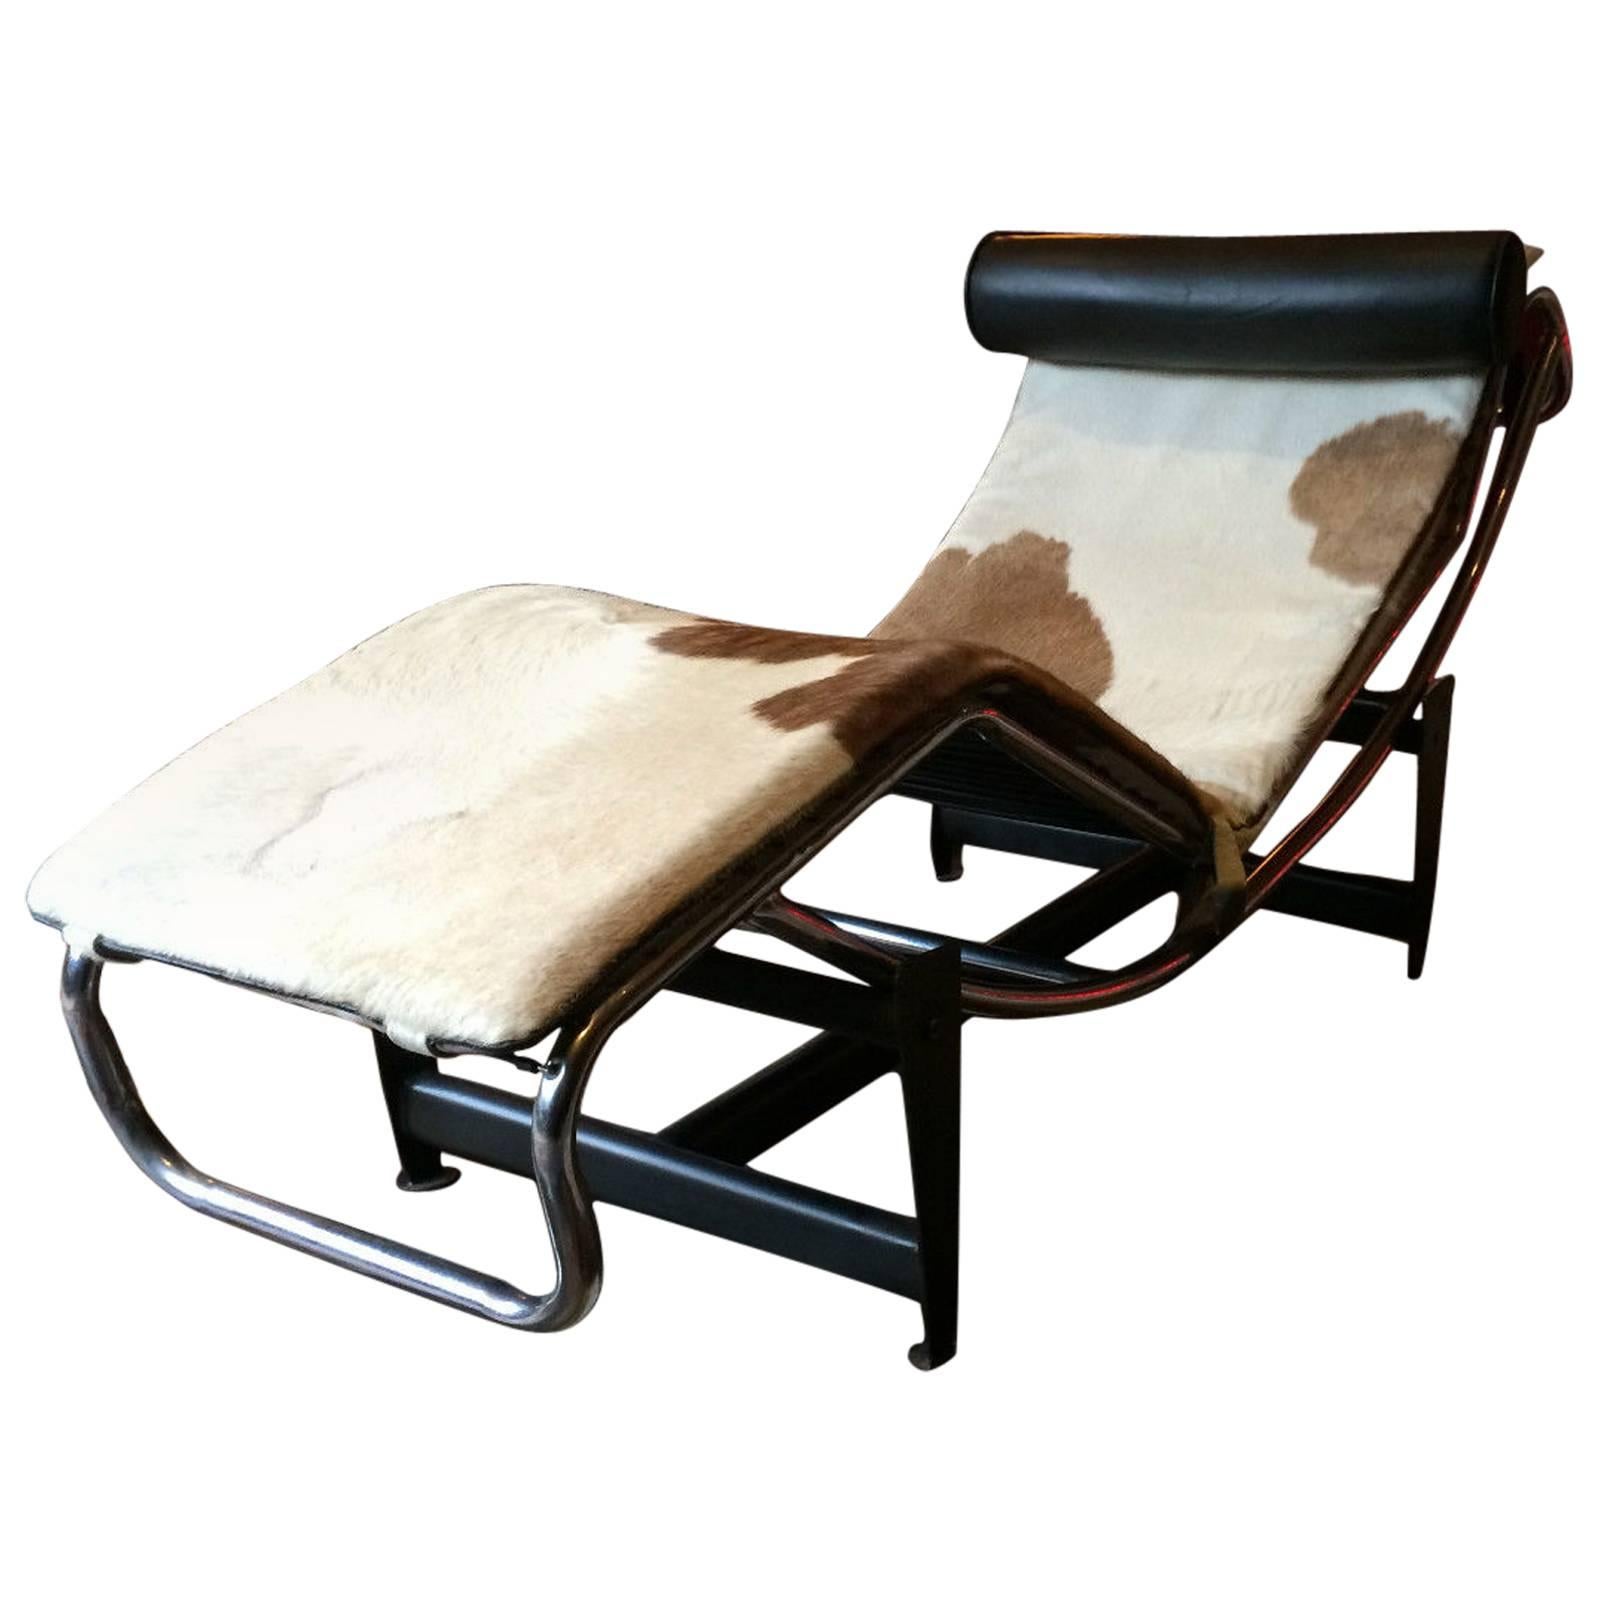 Fabulous Le Corbusier LC4 Style Chaise Longue Leather Cow Hide Matching Rug